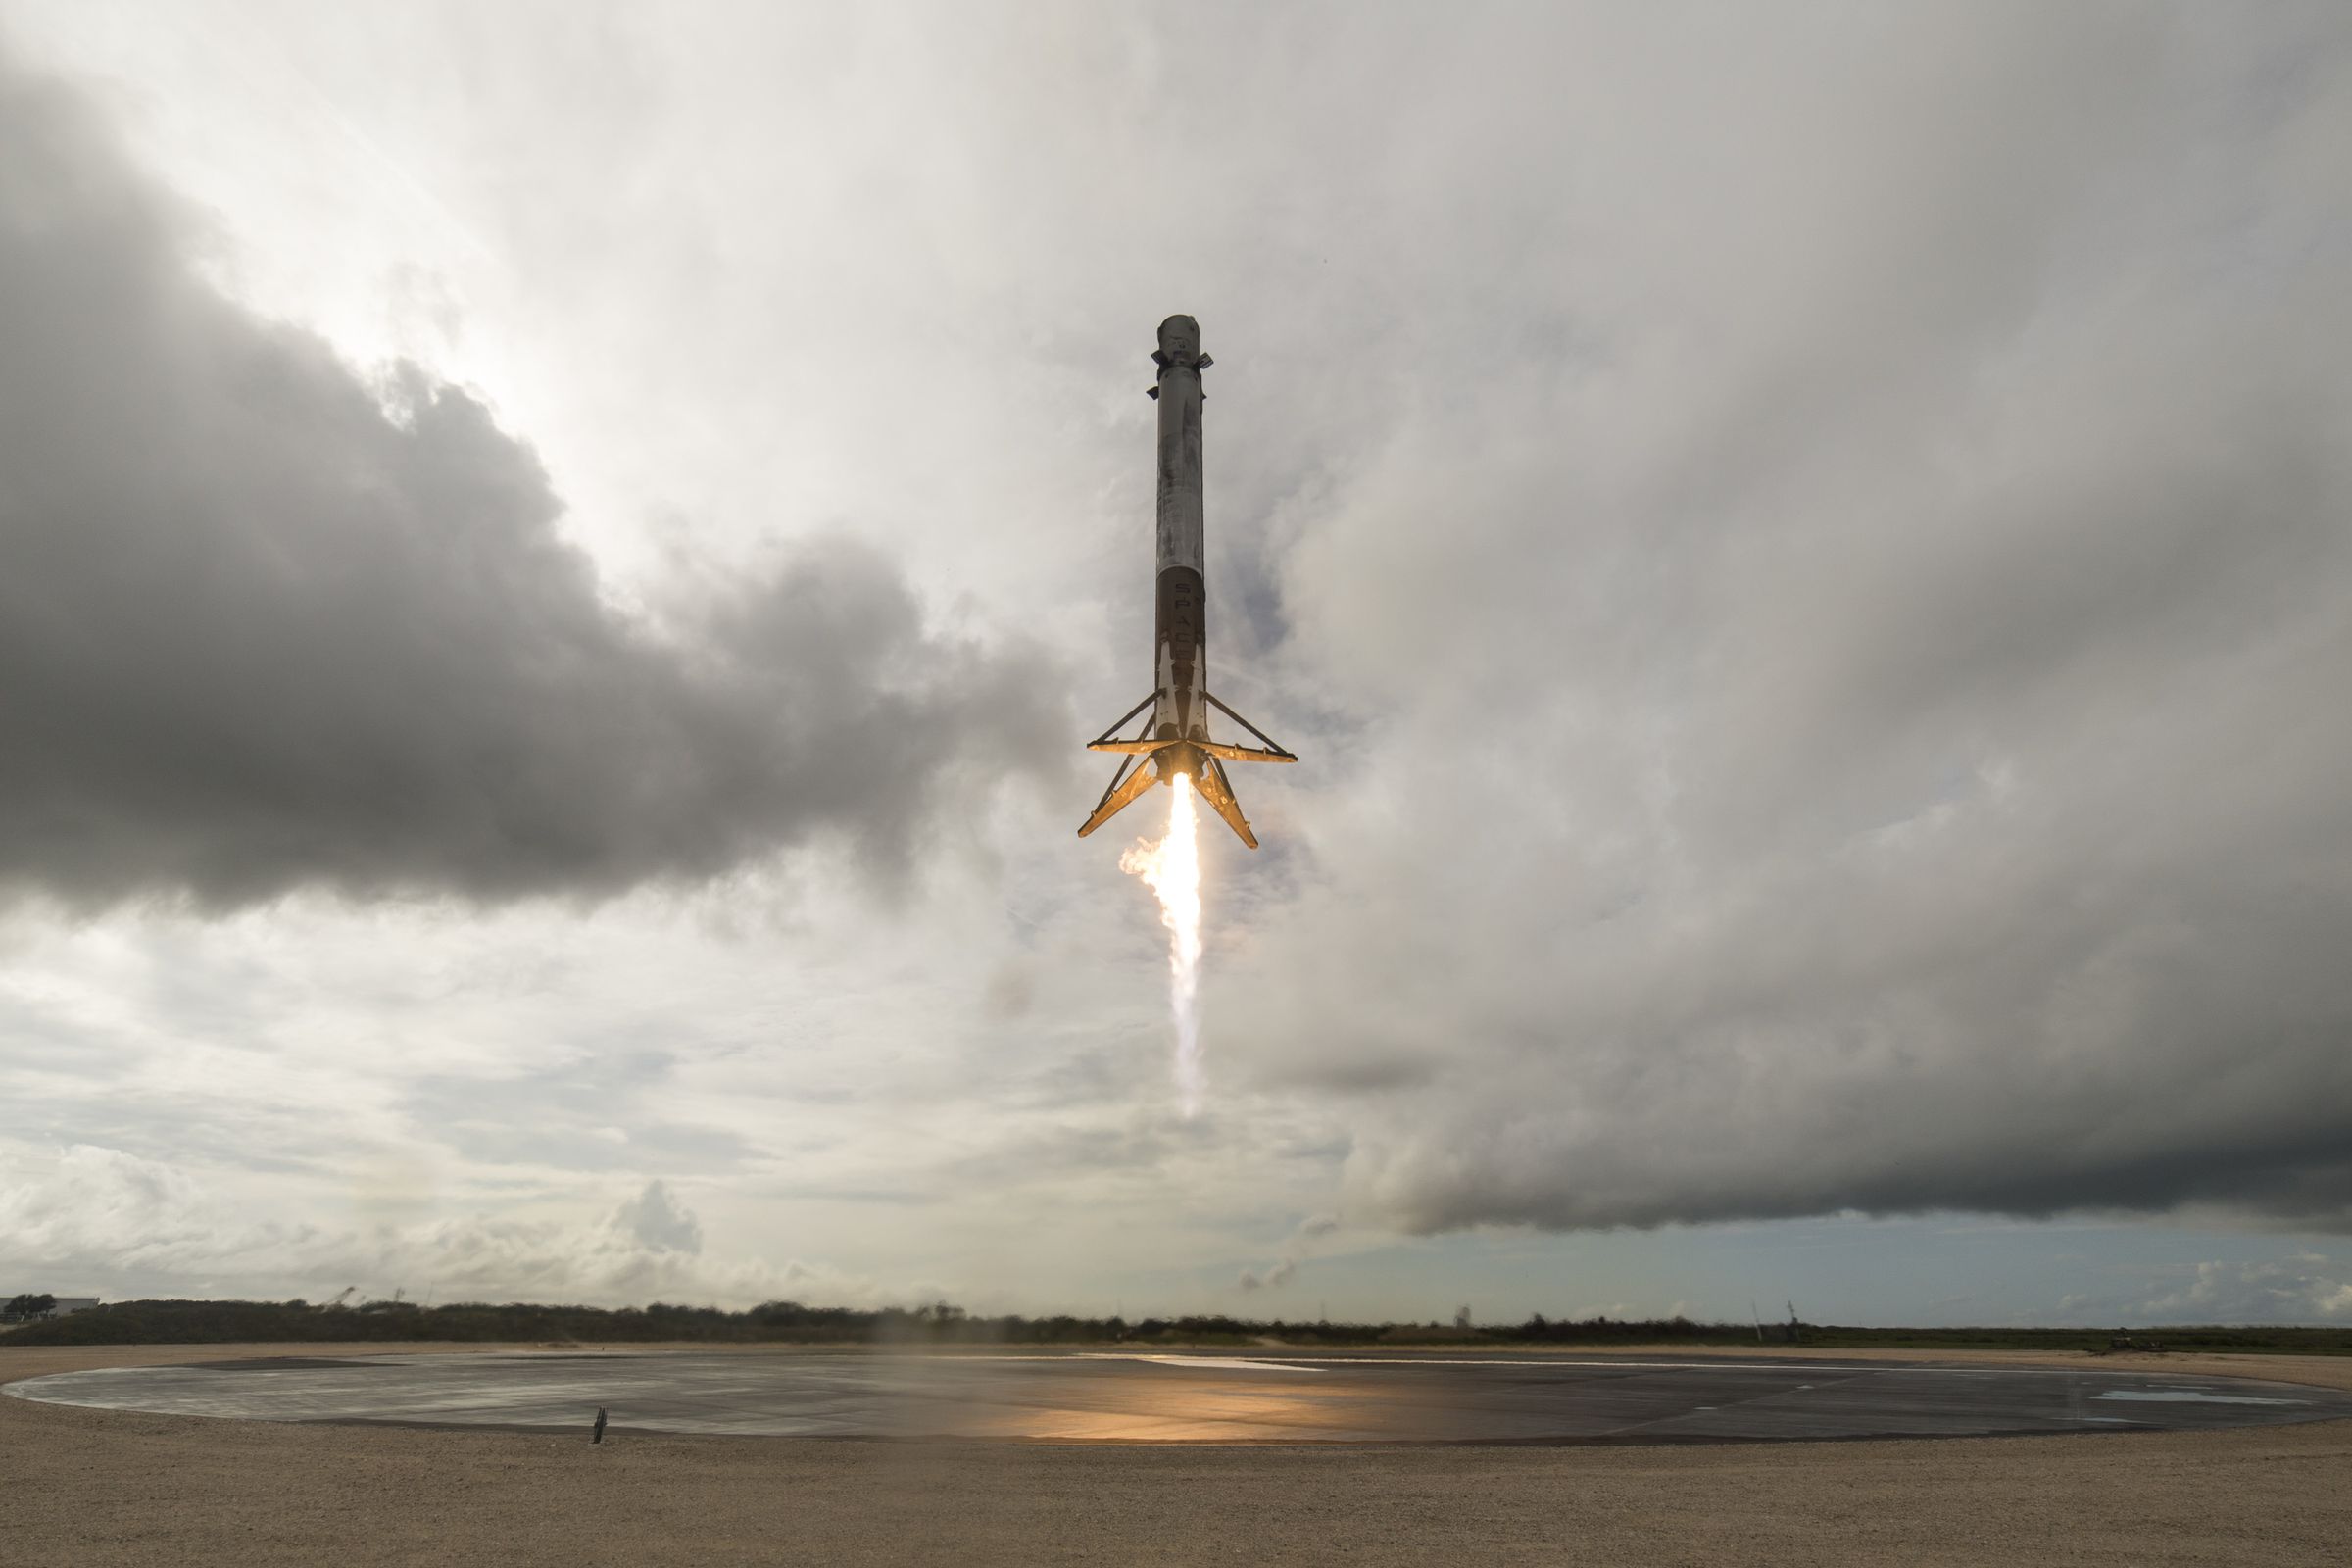 SpaceX’s Falcon 9 rocket landing in June of this year. The same vehicle will be used to launch supplies to the space station in December